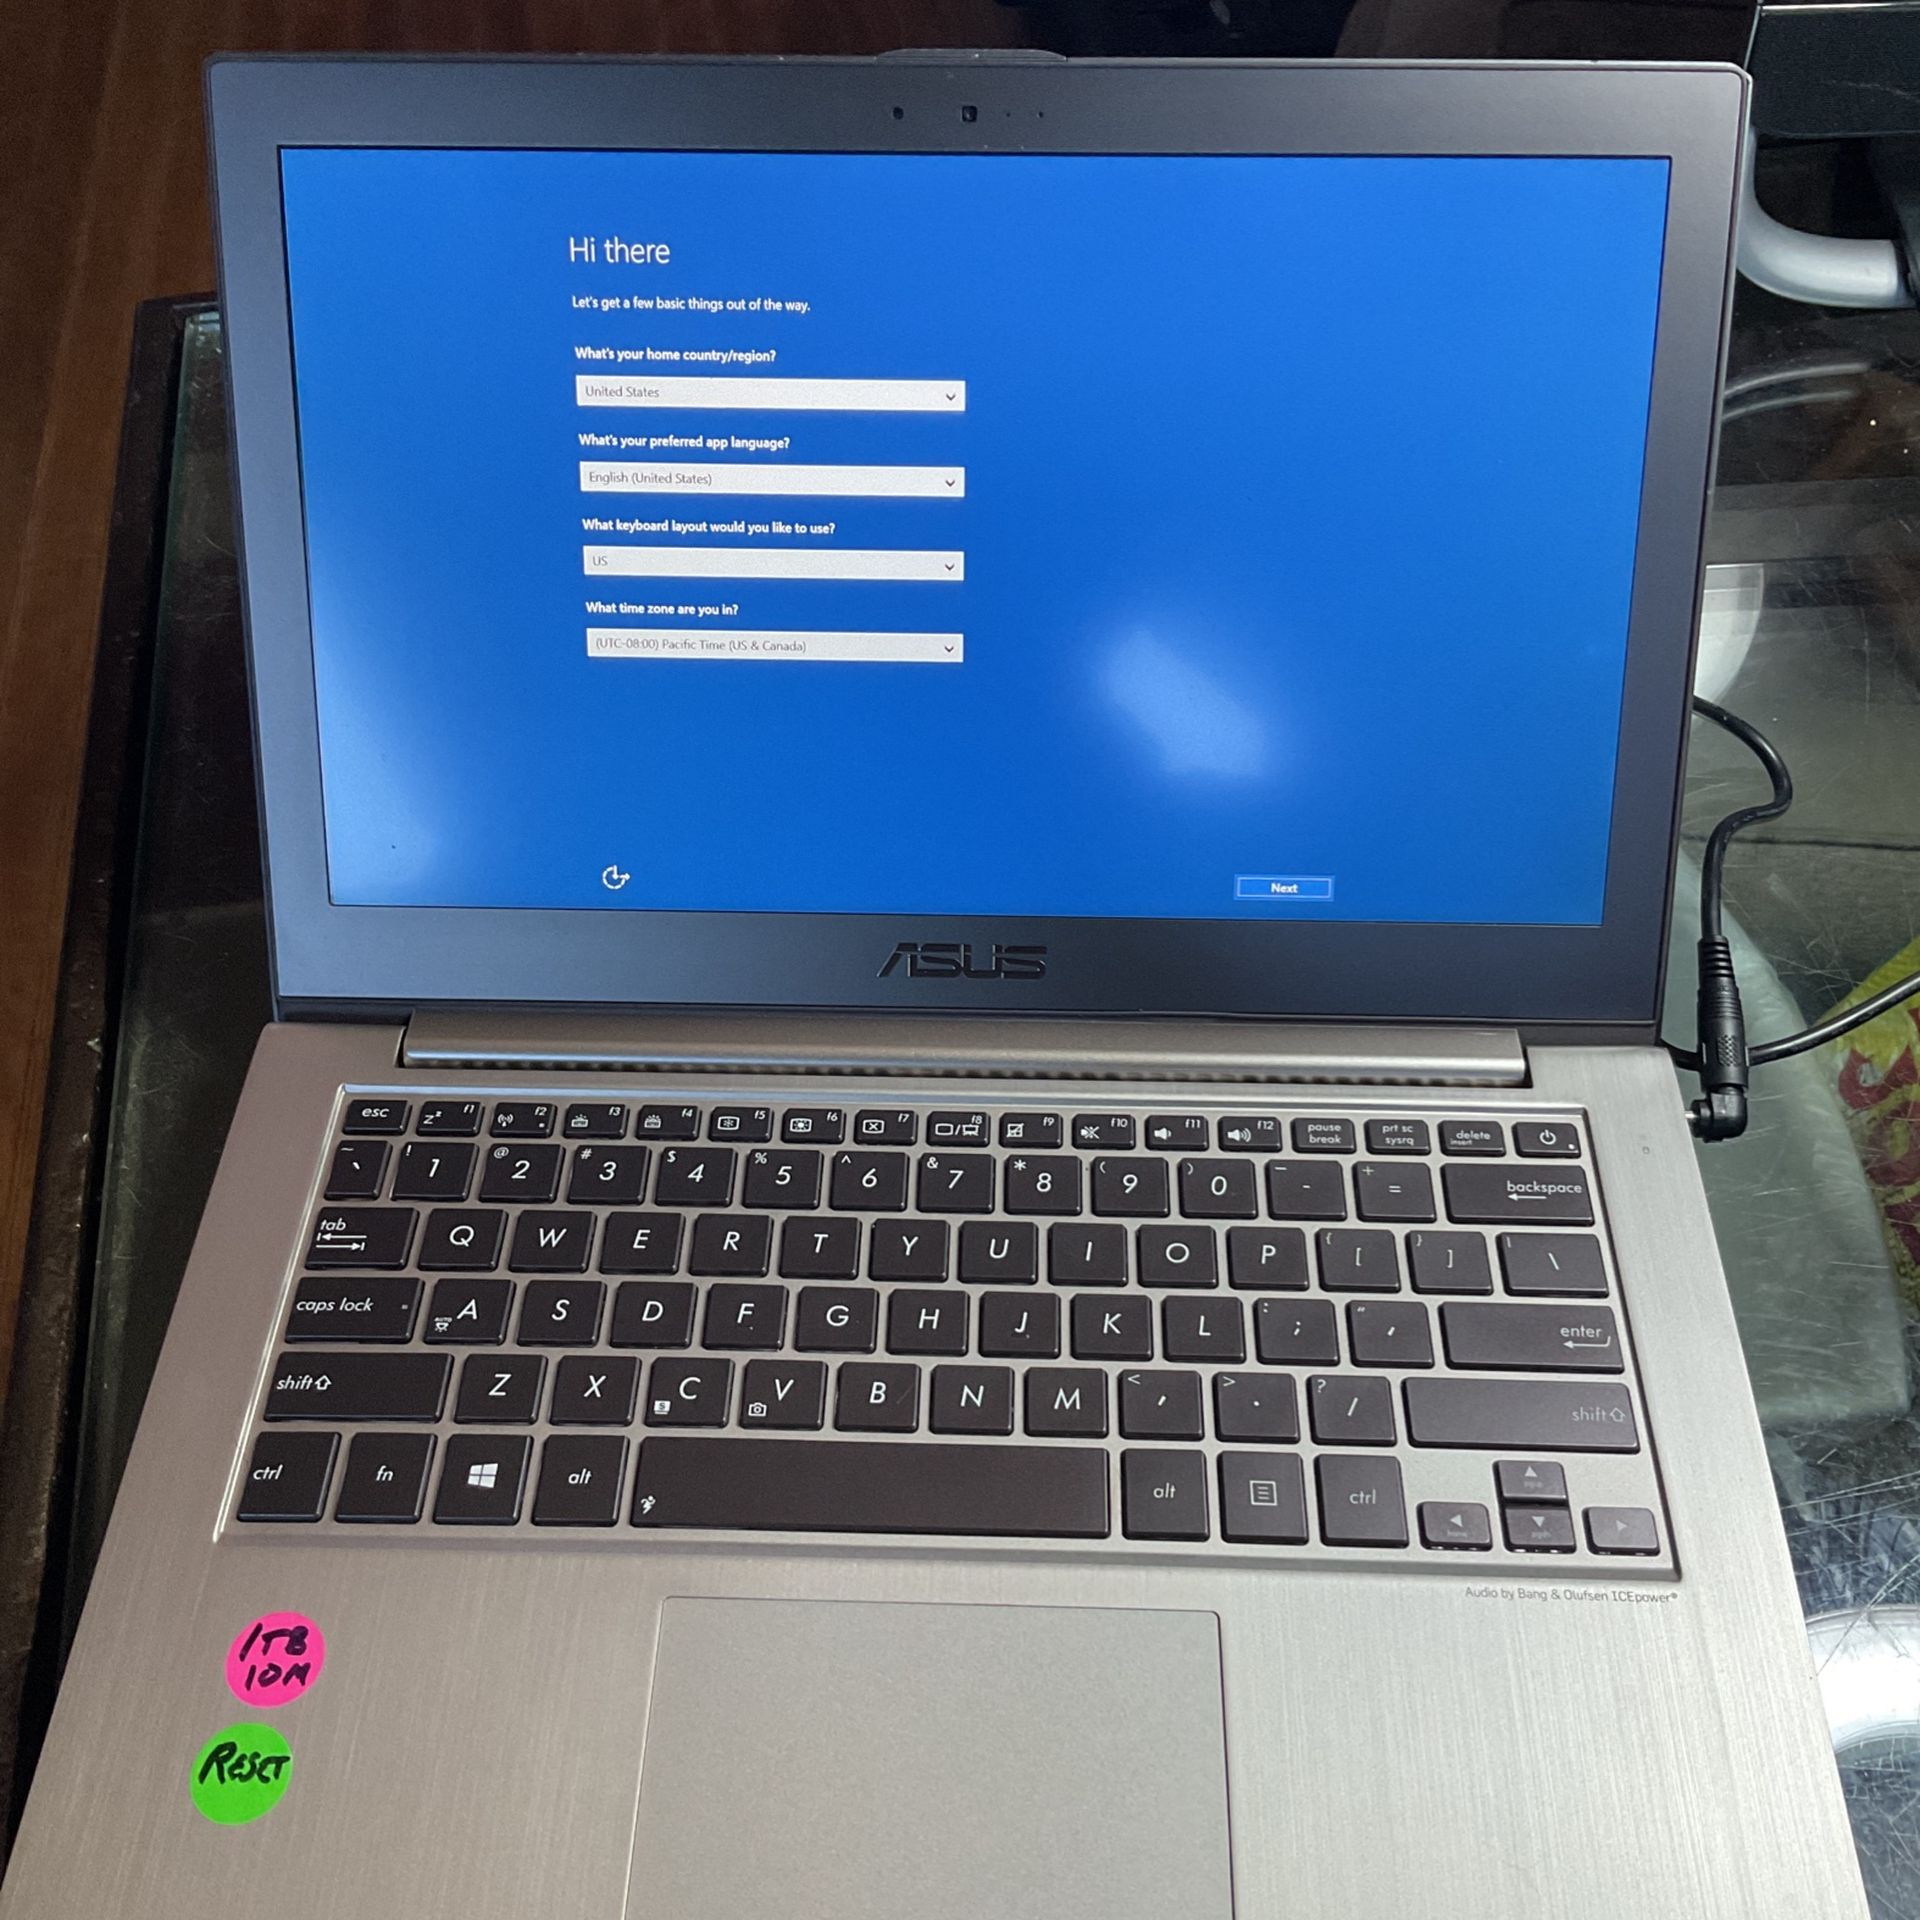 Asus Stainless Cover Laptop one terabyte hard drive with windows 10 completely factory reset ready to go with charger